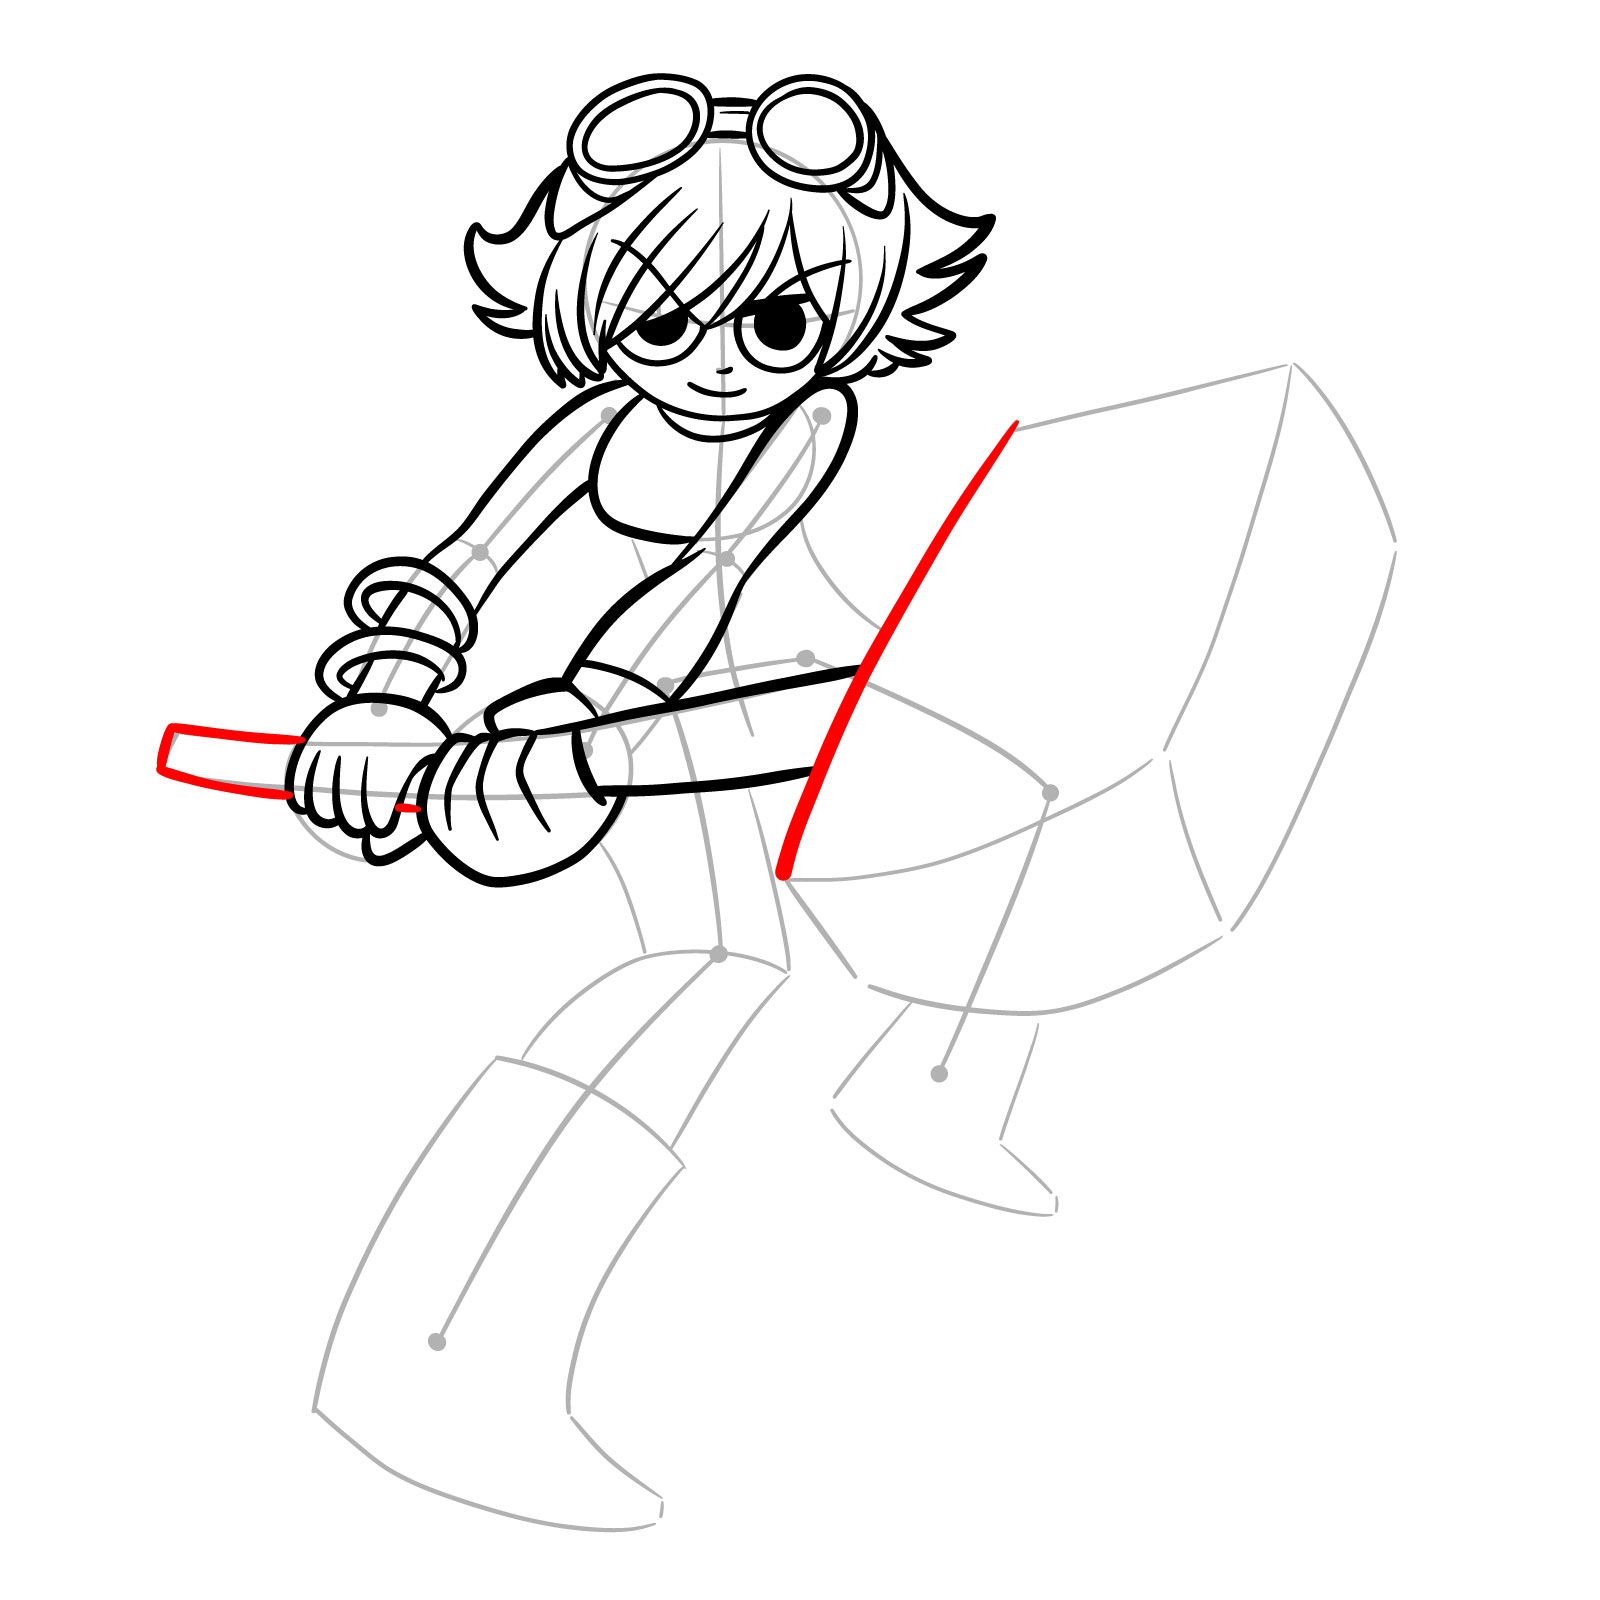 Ramona Flowers with her Large Hammer drawing - easy step-by-step guide - step 15